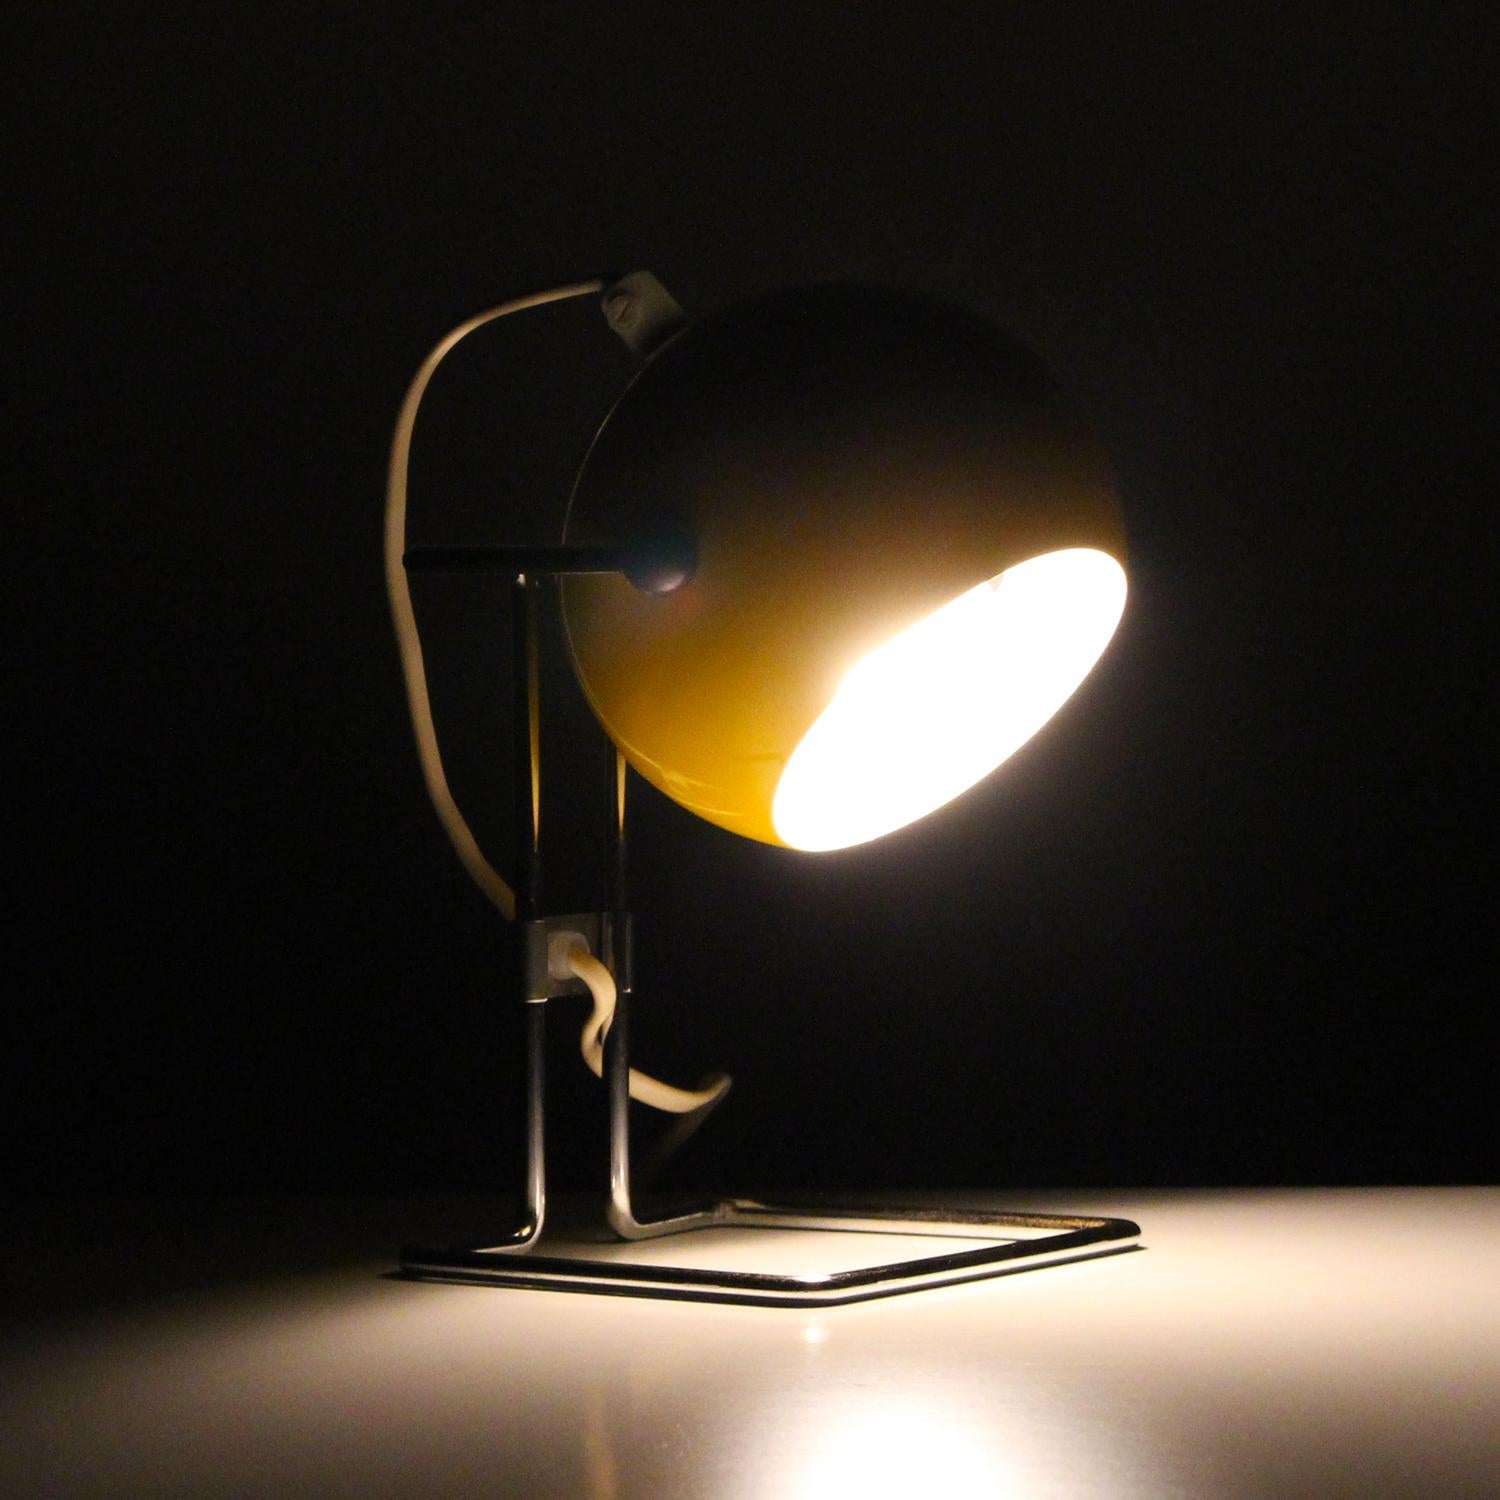 ABO STAT yellow desk light produced by ABO Randers in the 1960s - super attractive sunny yellow table lamp in very good vintage condition.

The BALL is originally designed by Hans Jørgen Berthel (the owner of ABO Randers) in the early 1960s, but